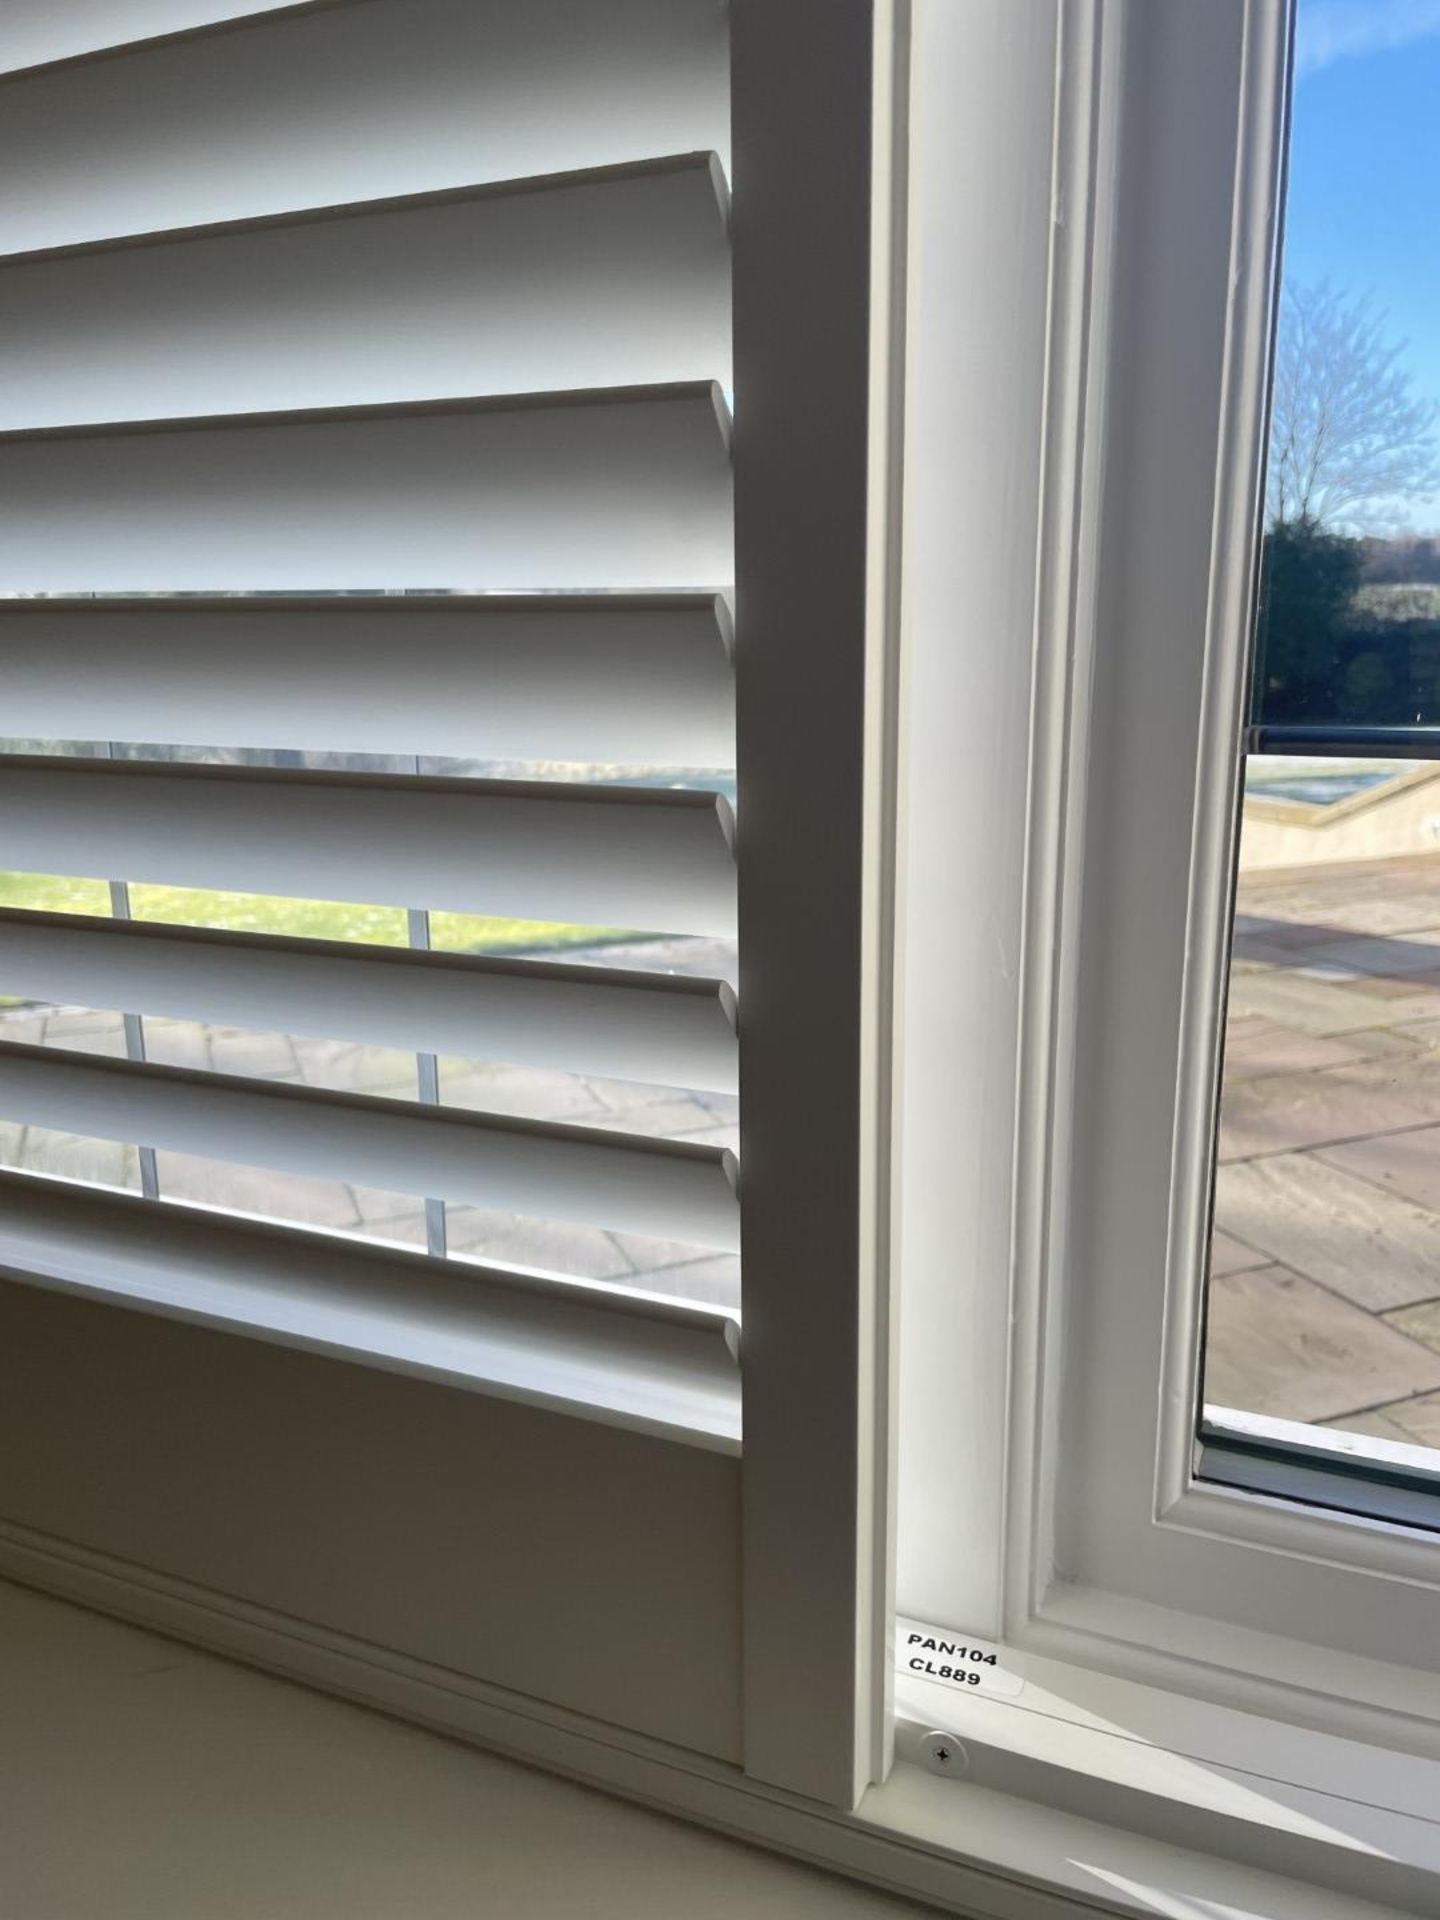 1 x Hardwood Timber Double Glazed Window Frames fitted with Shutter Blinds, In White - Ref: PAN104 - Image 8 of 12